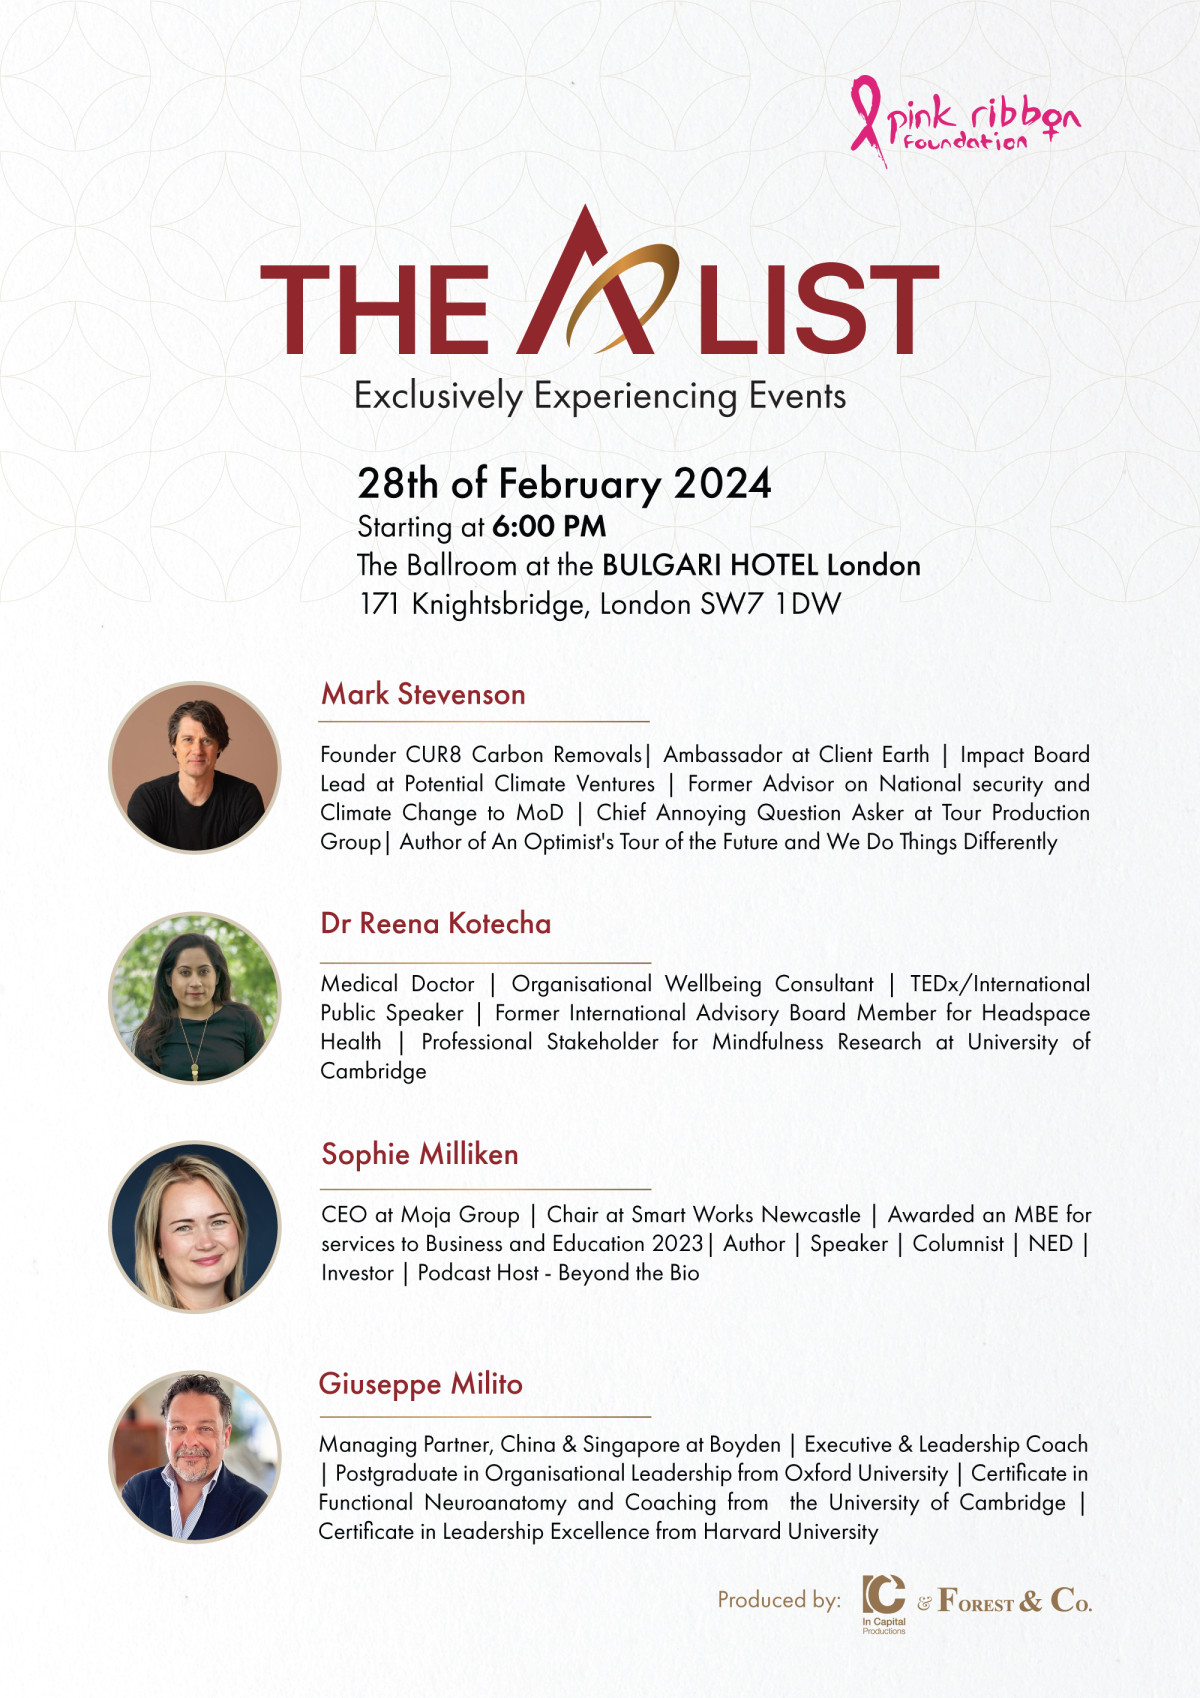 The A List London networking event